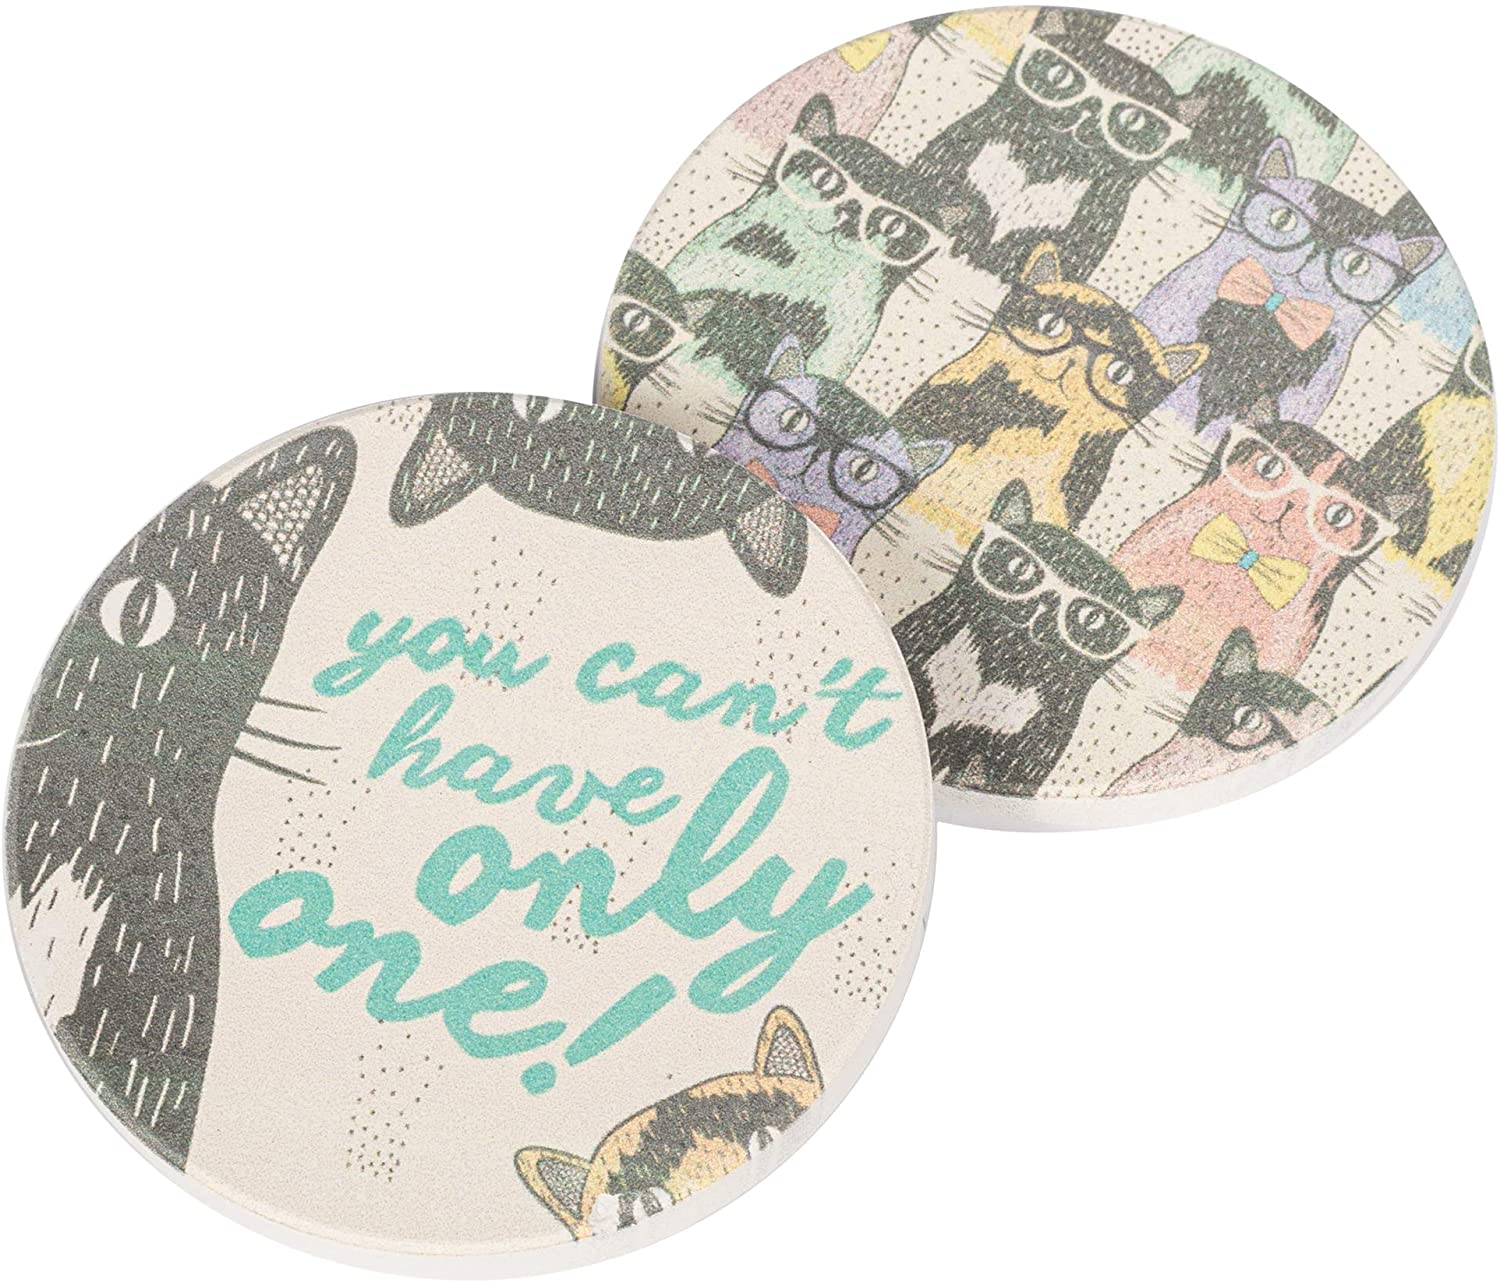 Cat Crazy, You Can't Only Have One 2.75 x 2.75 Absorbent Ceramic Car Coasters Pack of 2